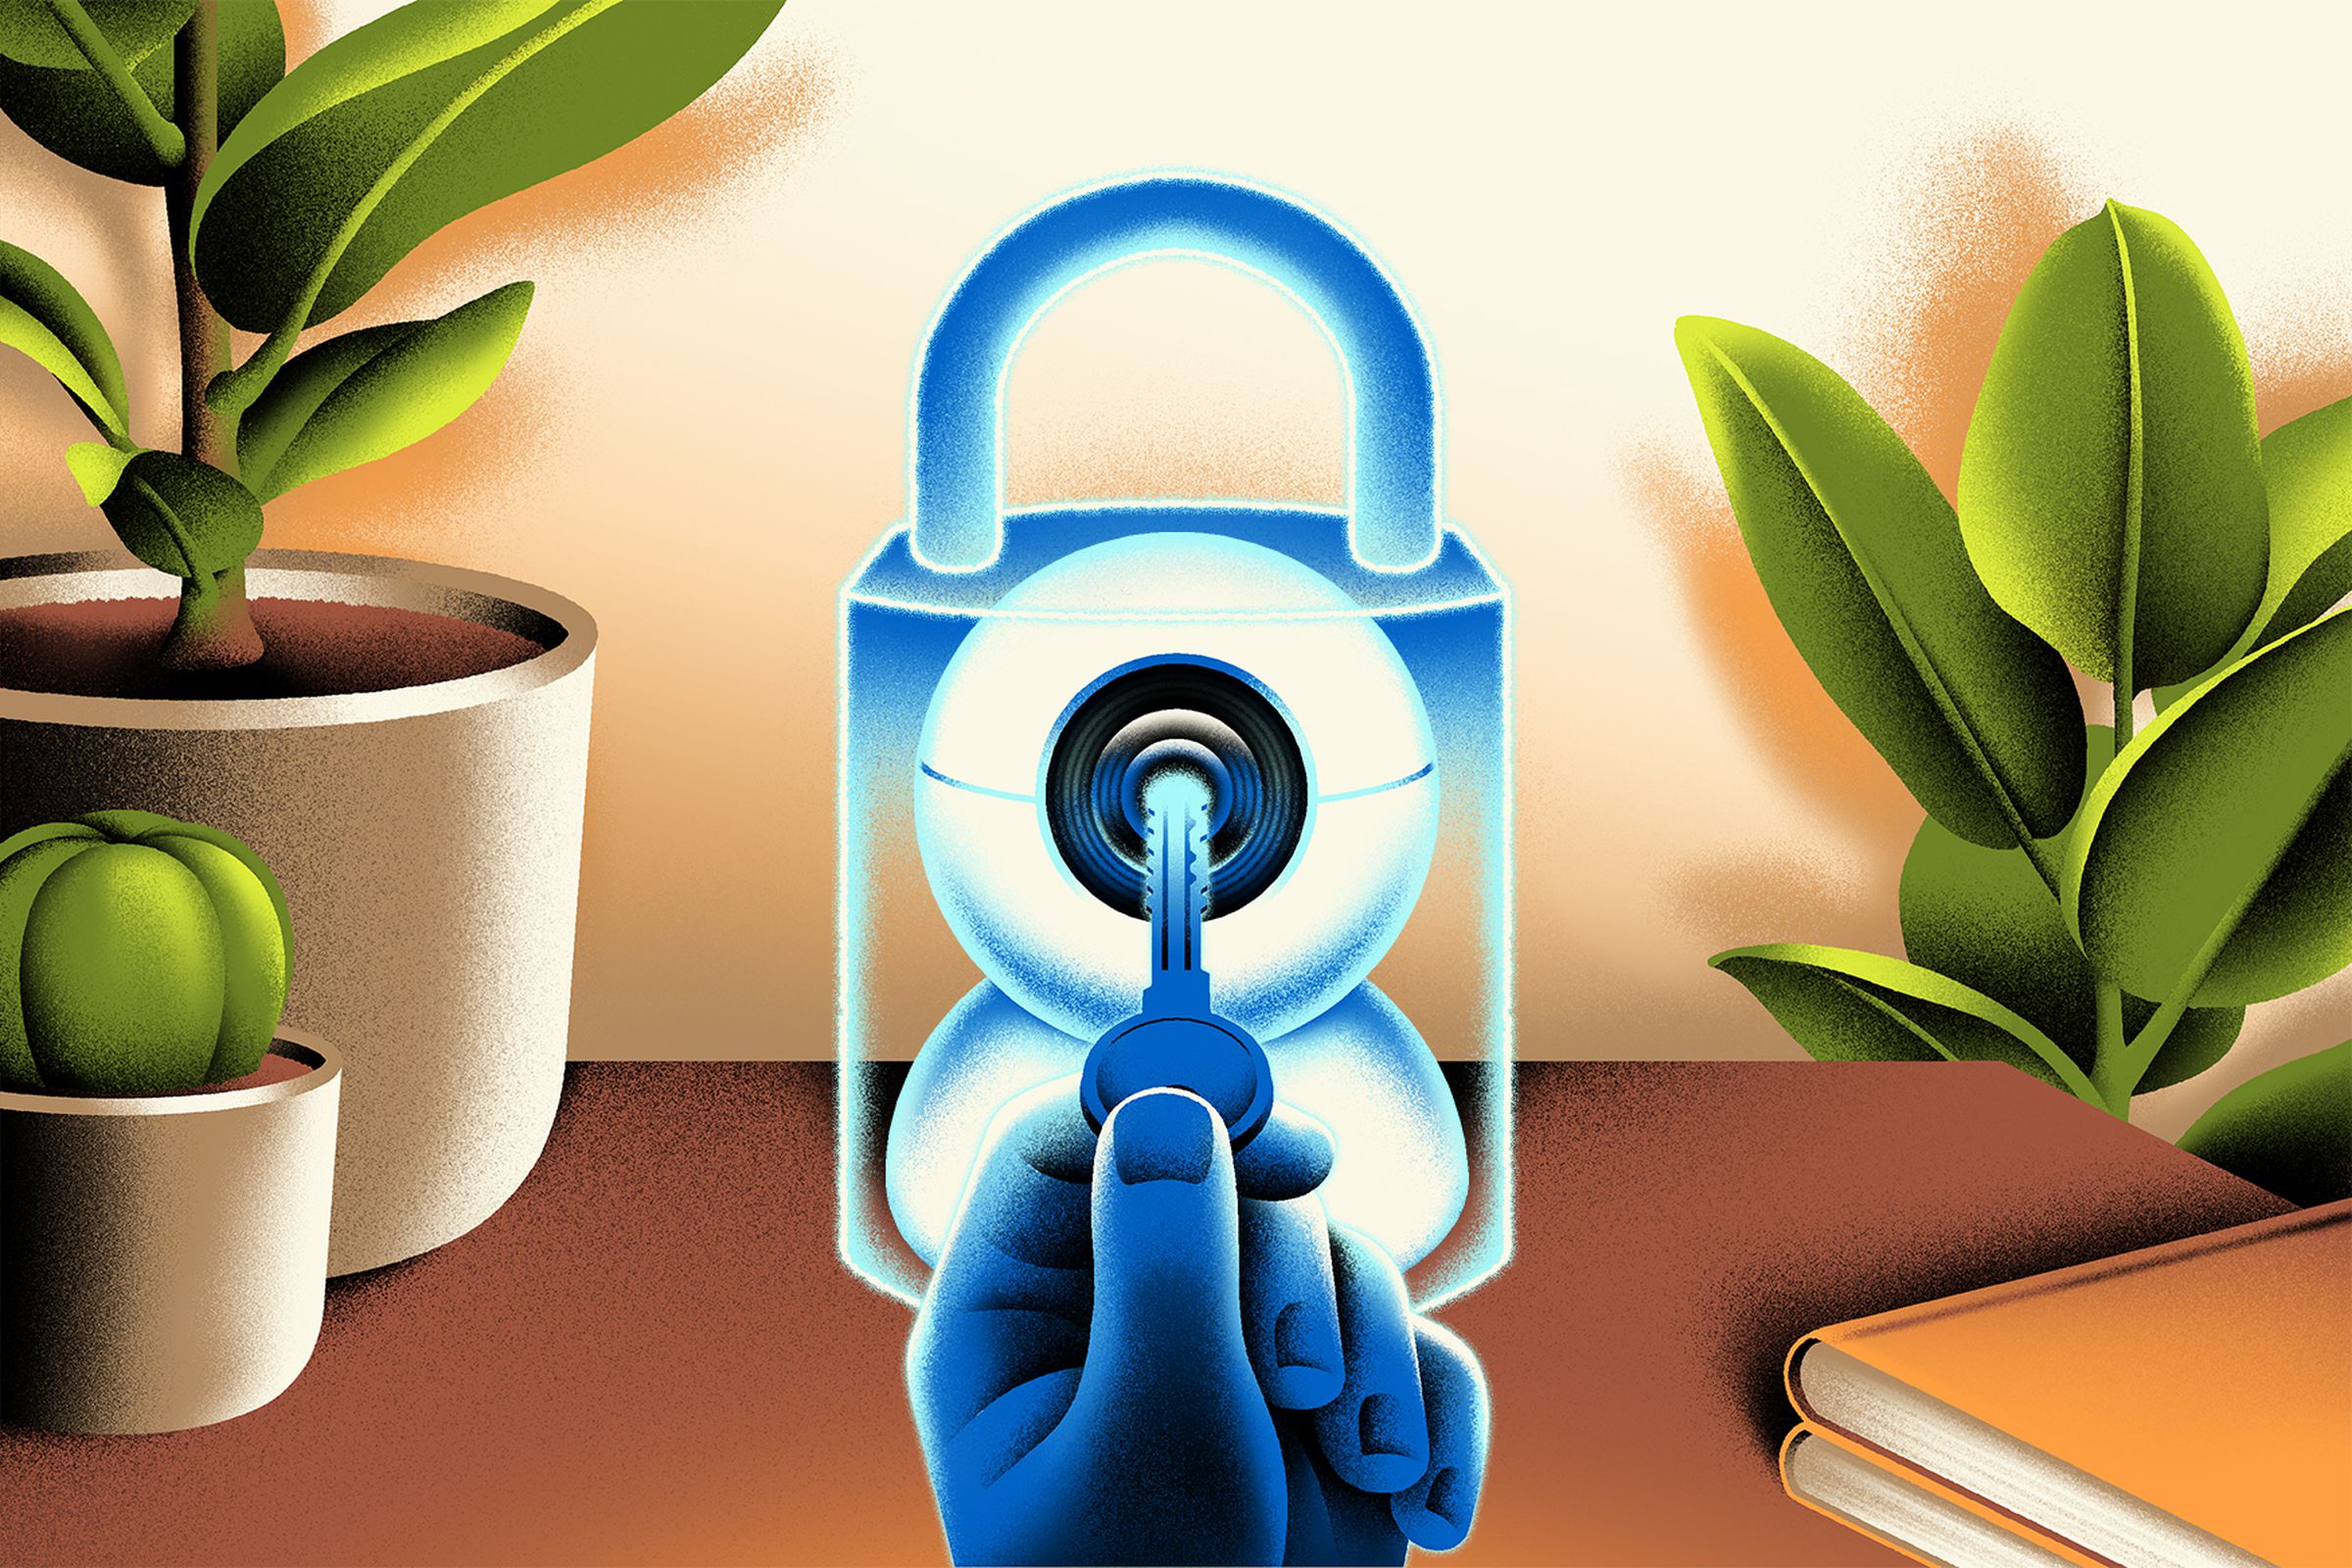 Illustration showing a security camera encased in a lock.